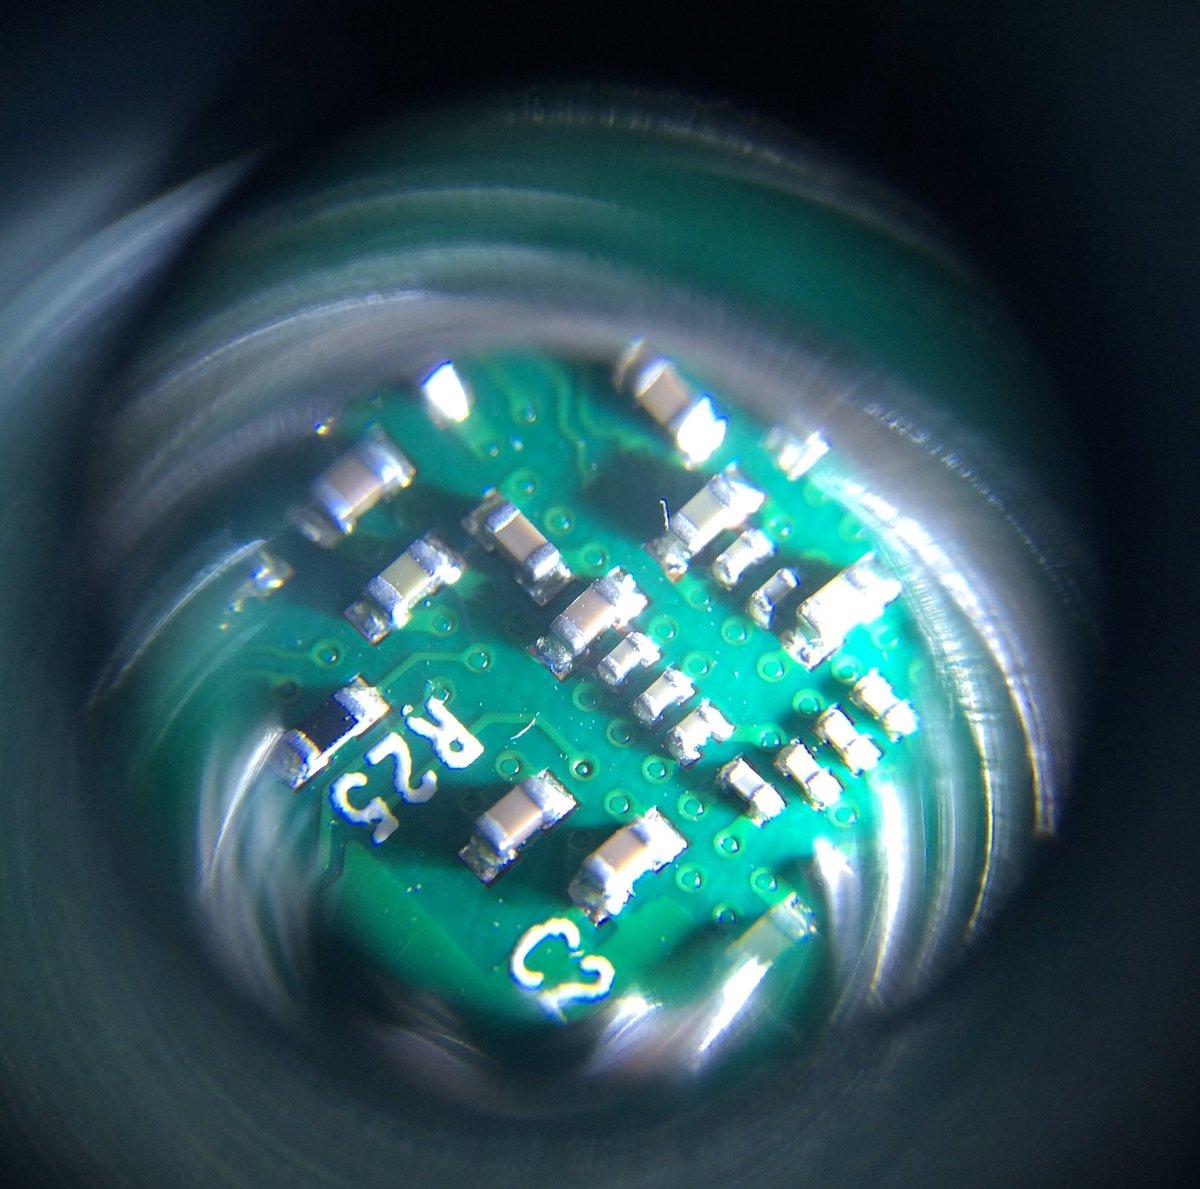 A look through the new #pocketmicroscope from #tinkersphere! #tinkering #circuitdesign #pcbrepair